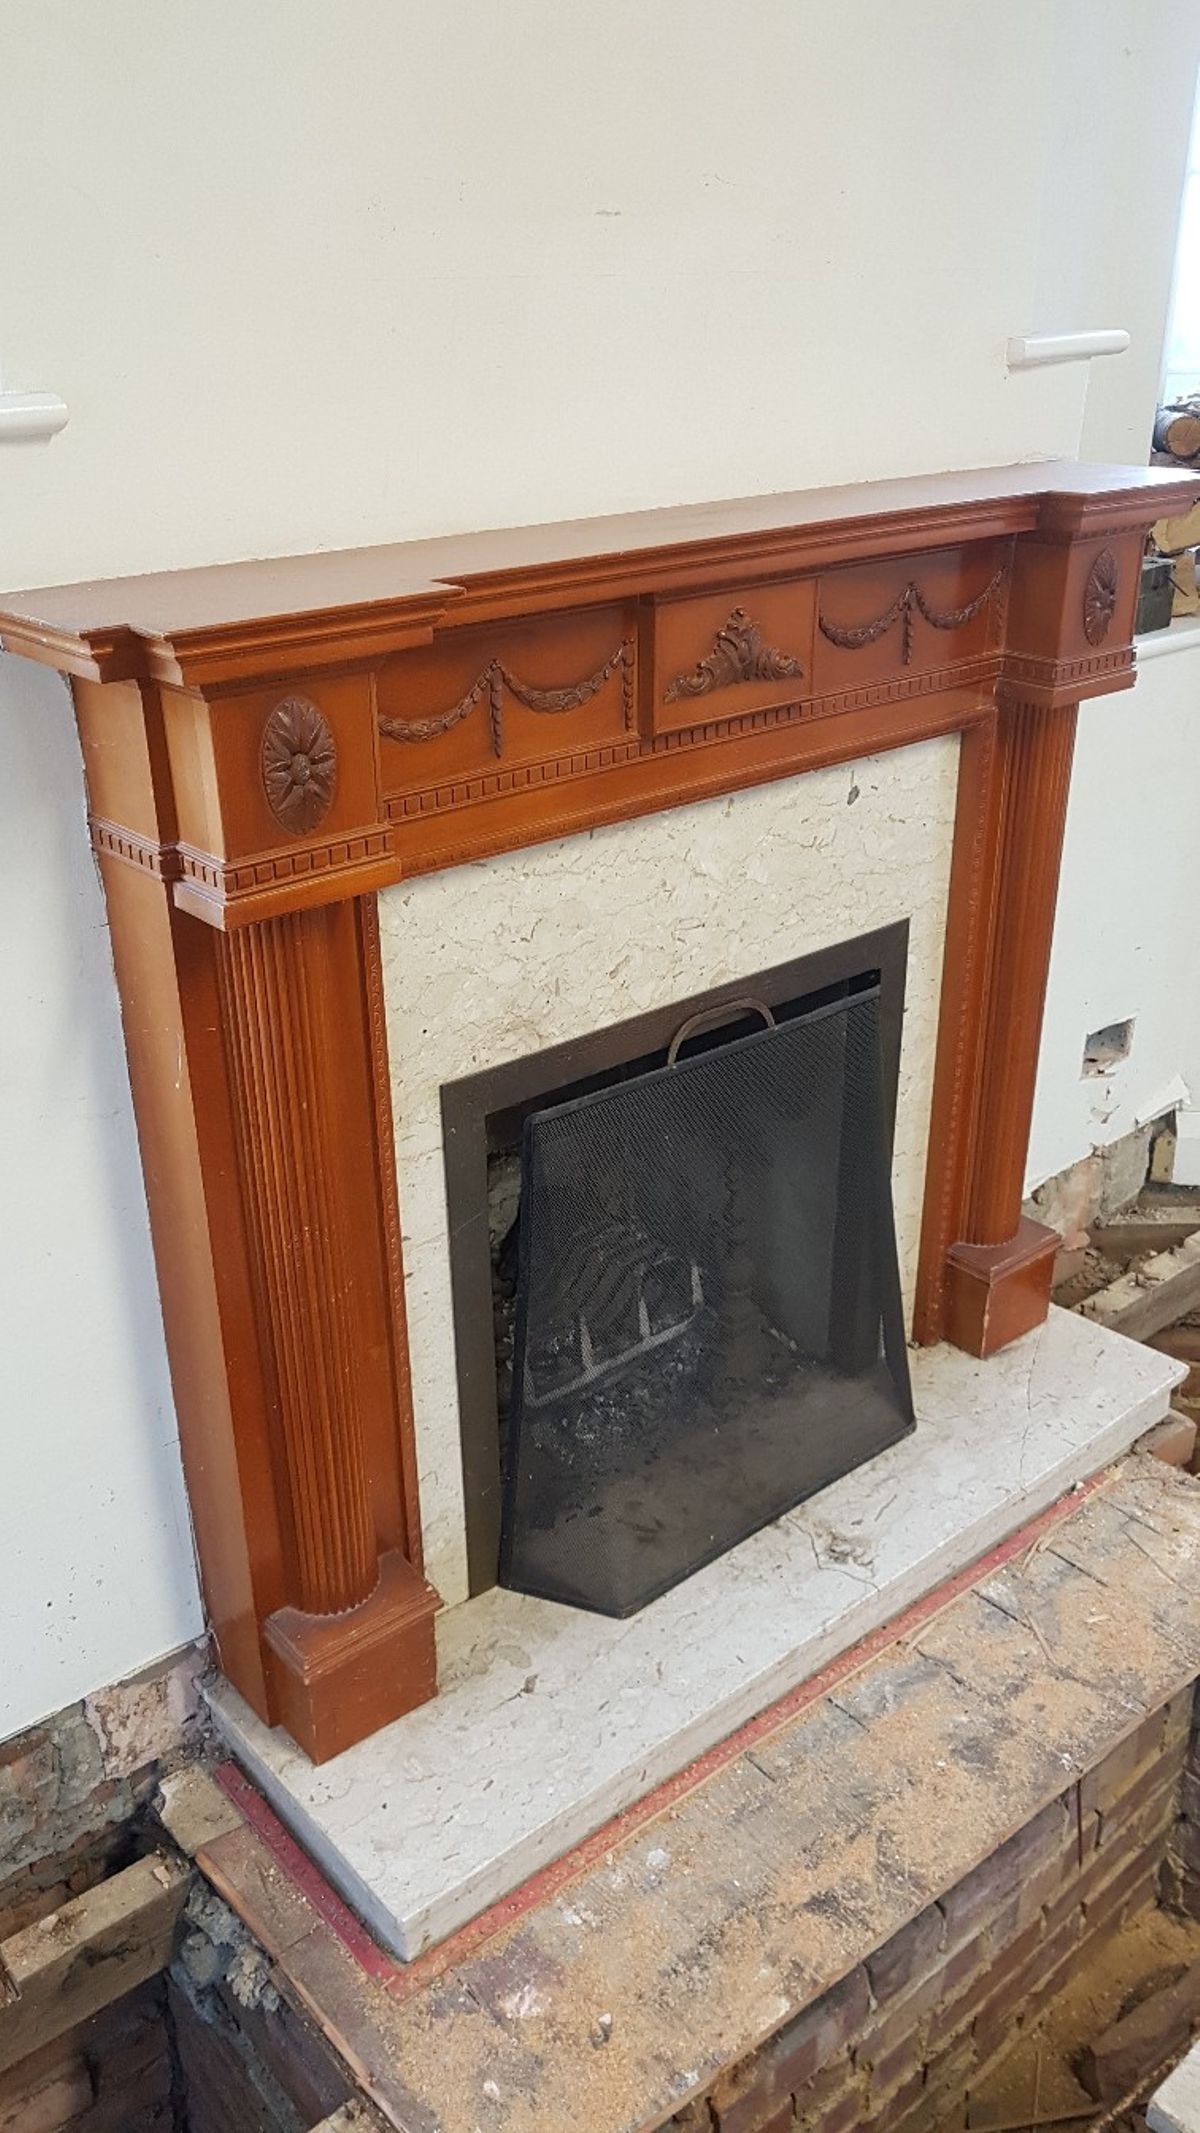 Where to Buy Fireplace Hearth Stone Elegant Marble Fireplace Surround with Mantelpiece